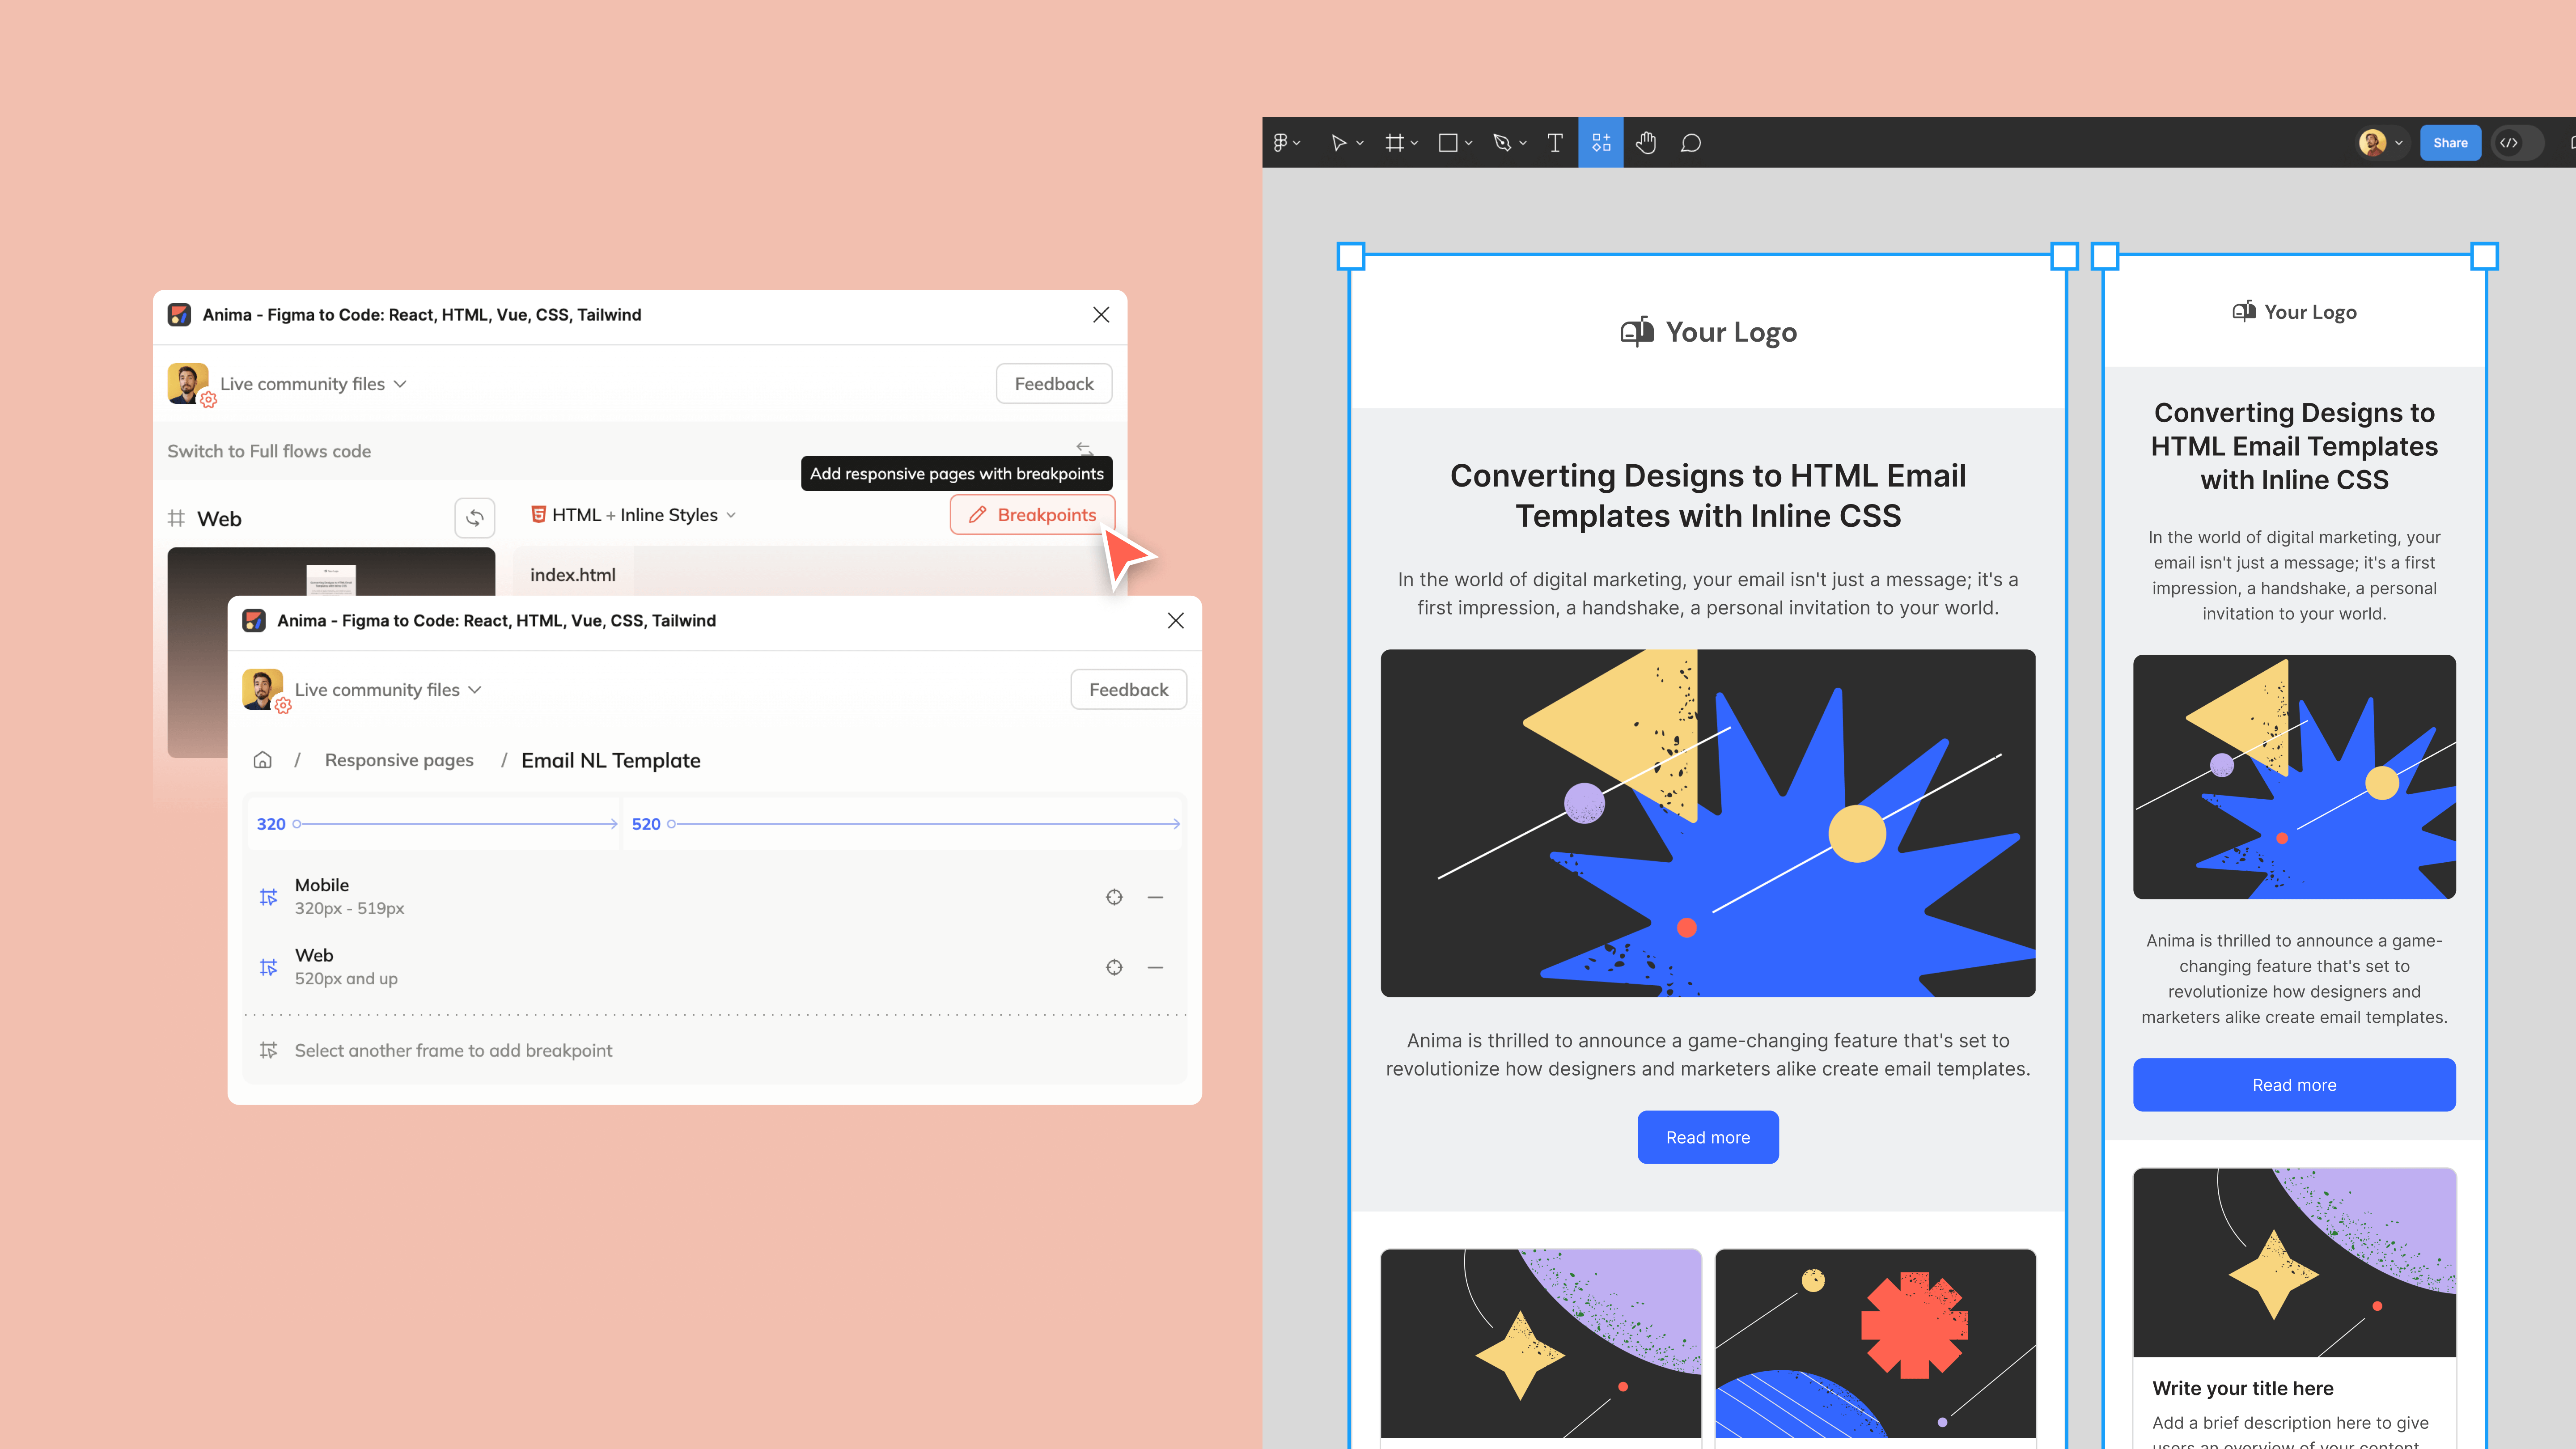 Responsive layout for every device